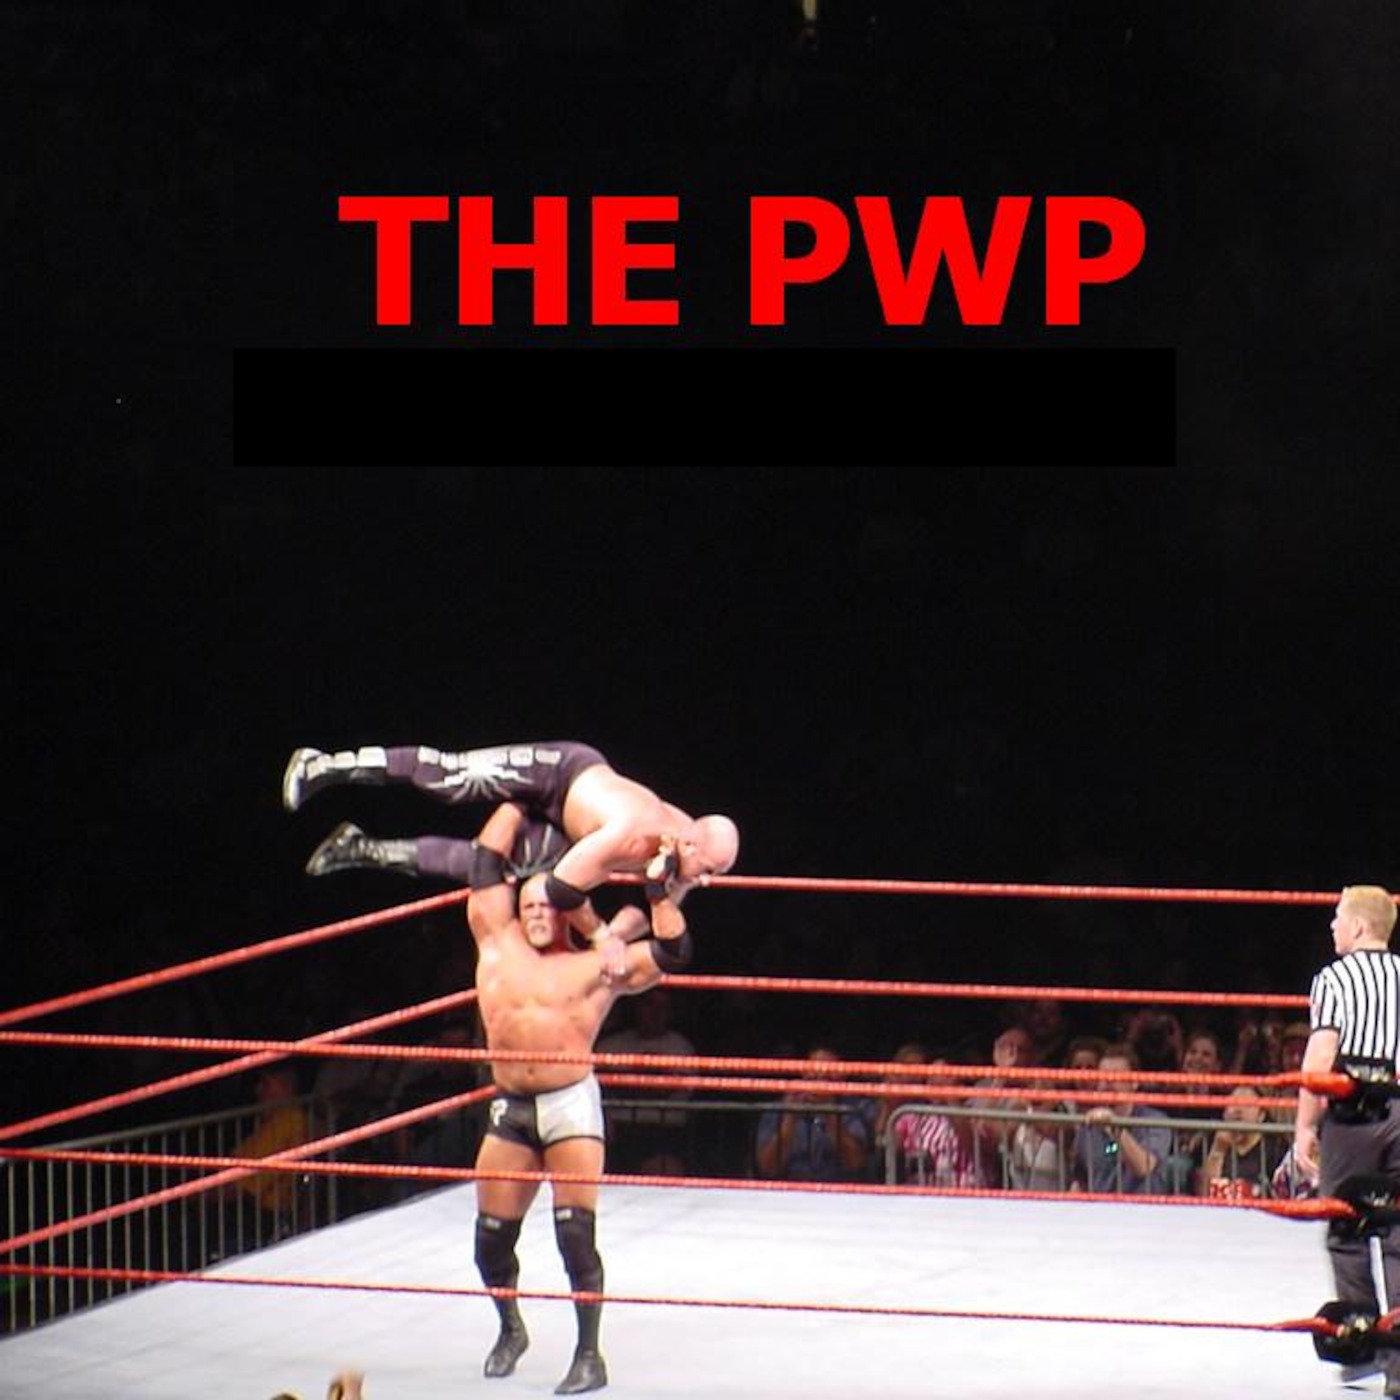 THE PWP